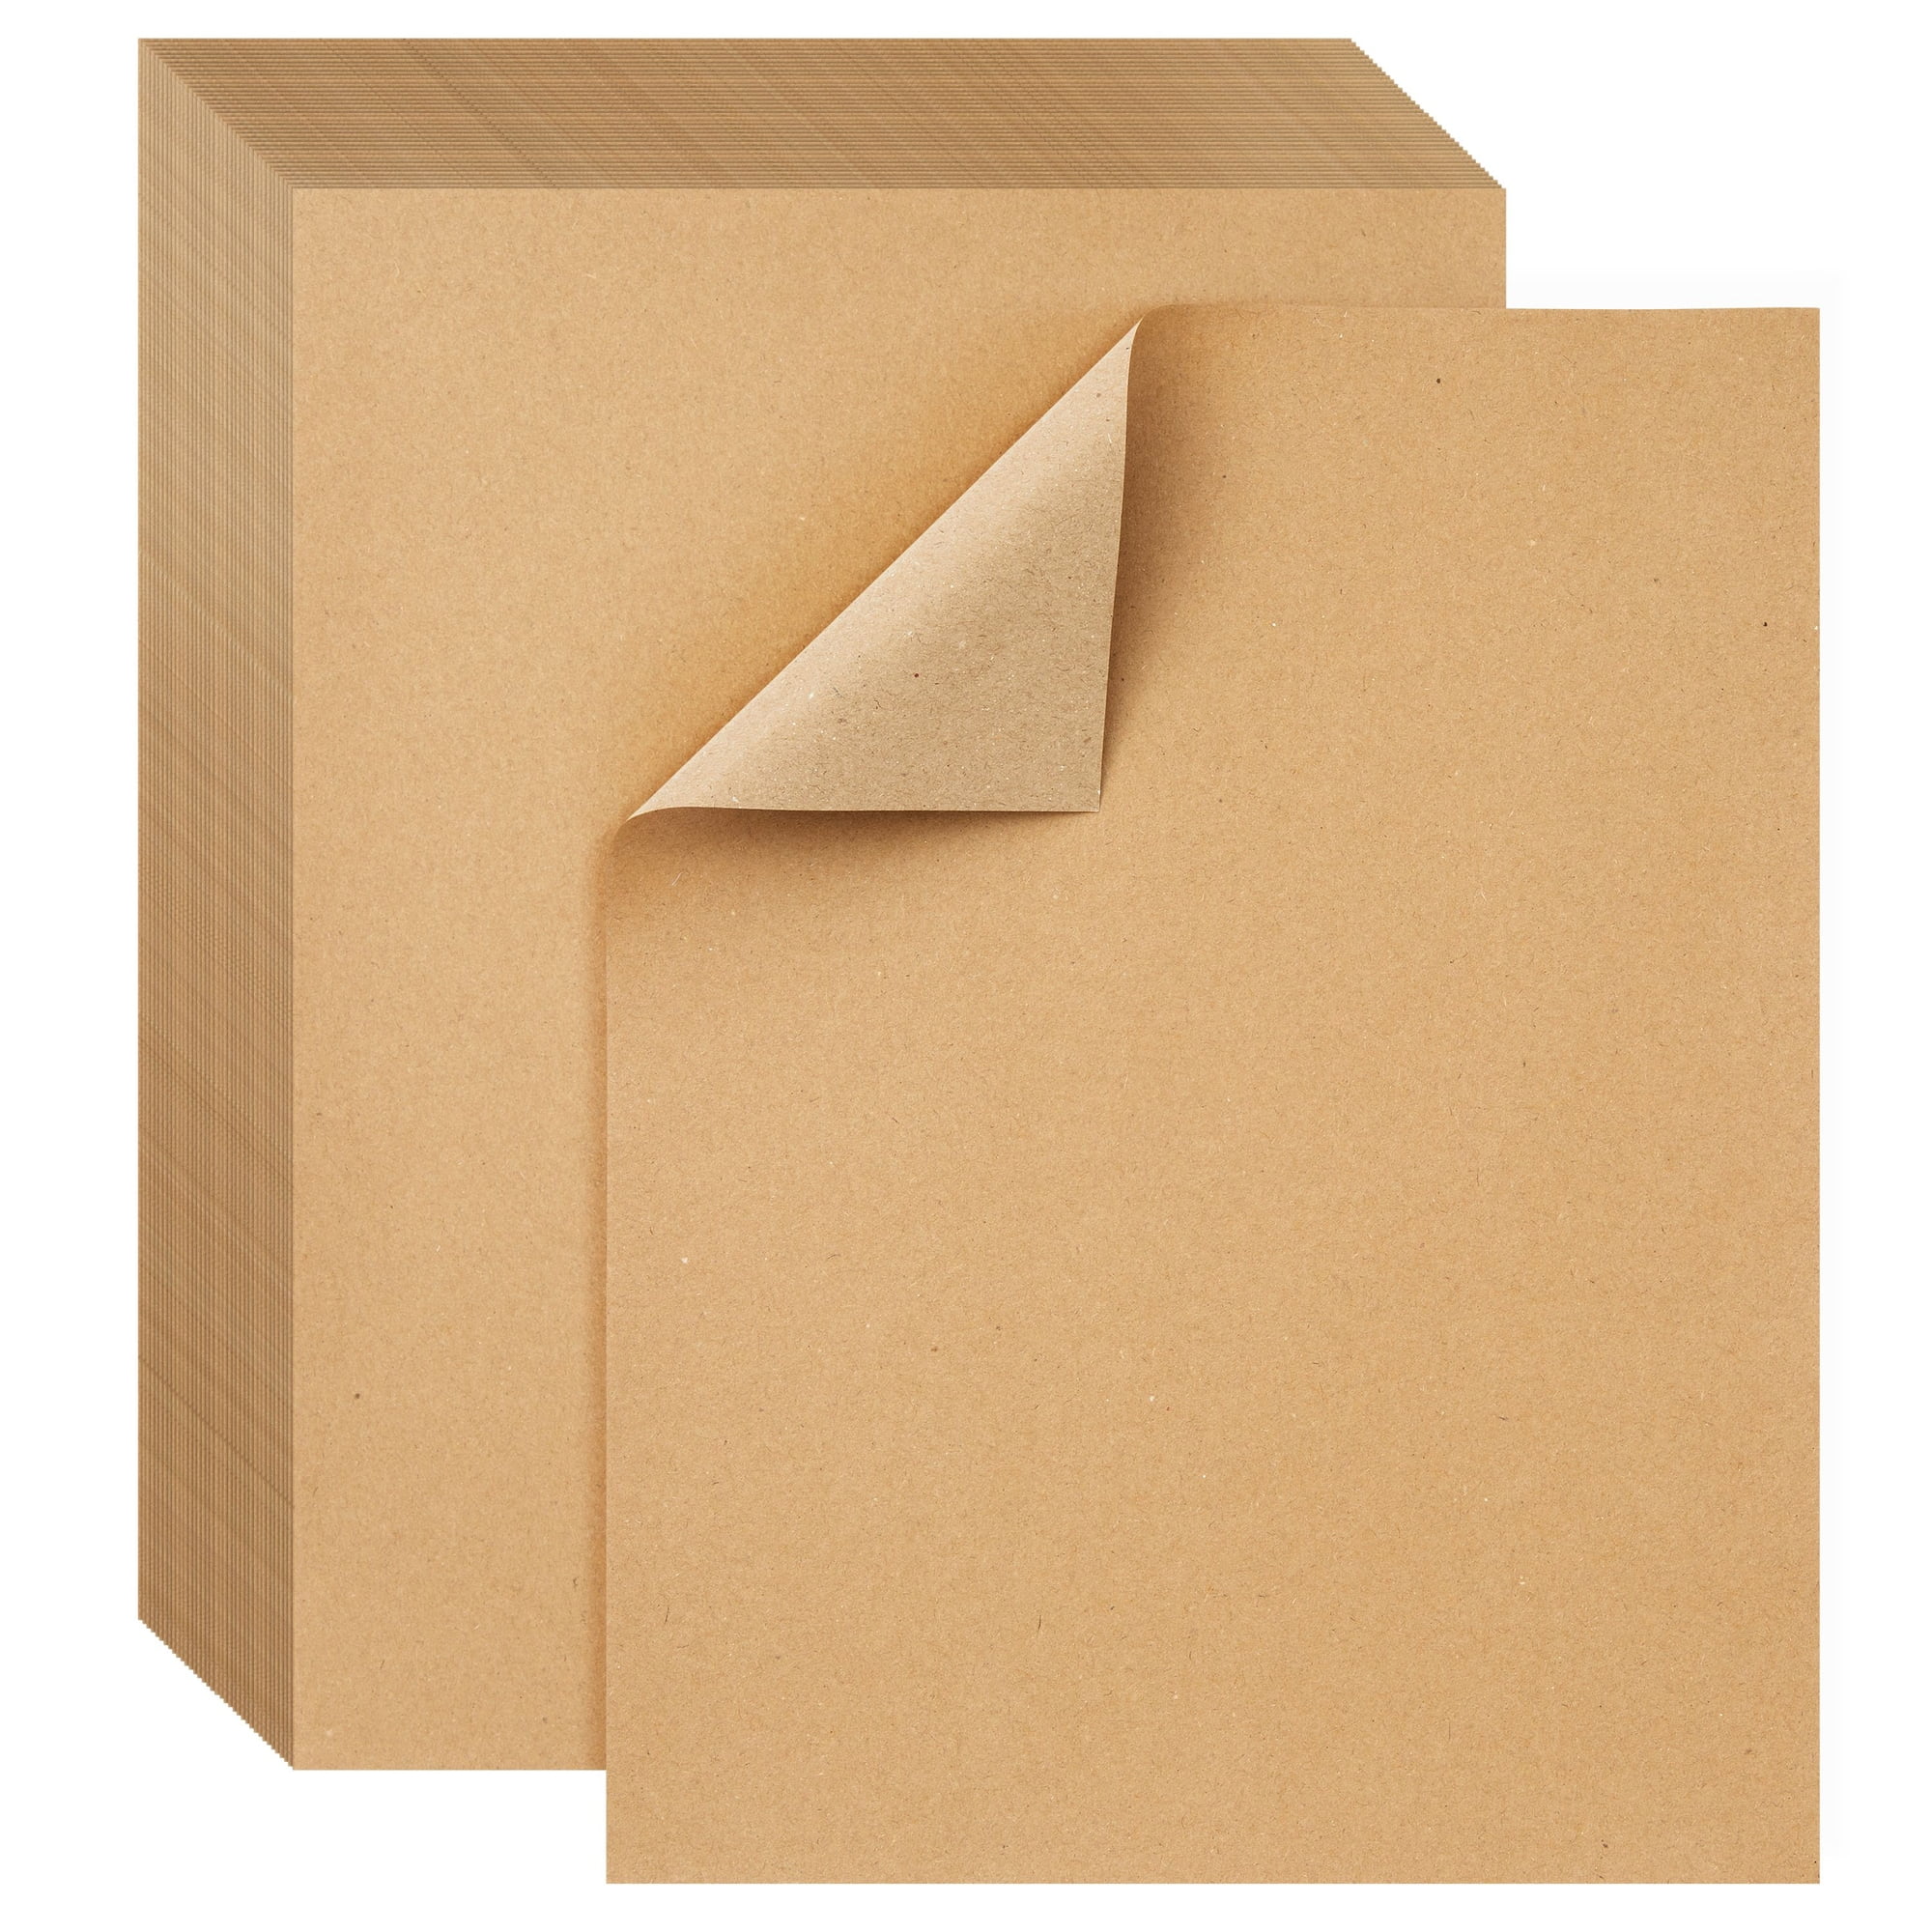  FEPITO 60 Sheets Kraft Paper 8.5 x 11 Inches Brown Paper  Letter Size Craft Paper Sheets for Printing Labels DIY Arts and Craft :  Arts, Crafts & Sewing